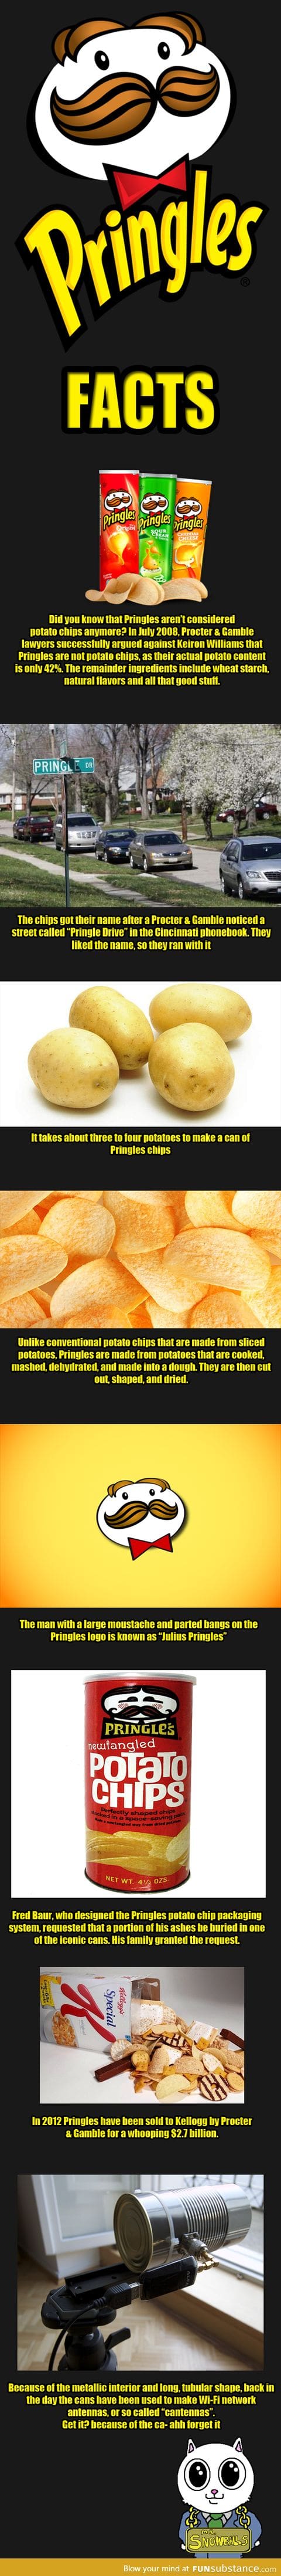 Pringles facts compilation